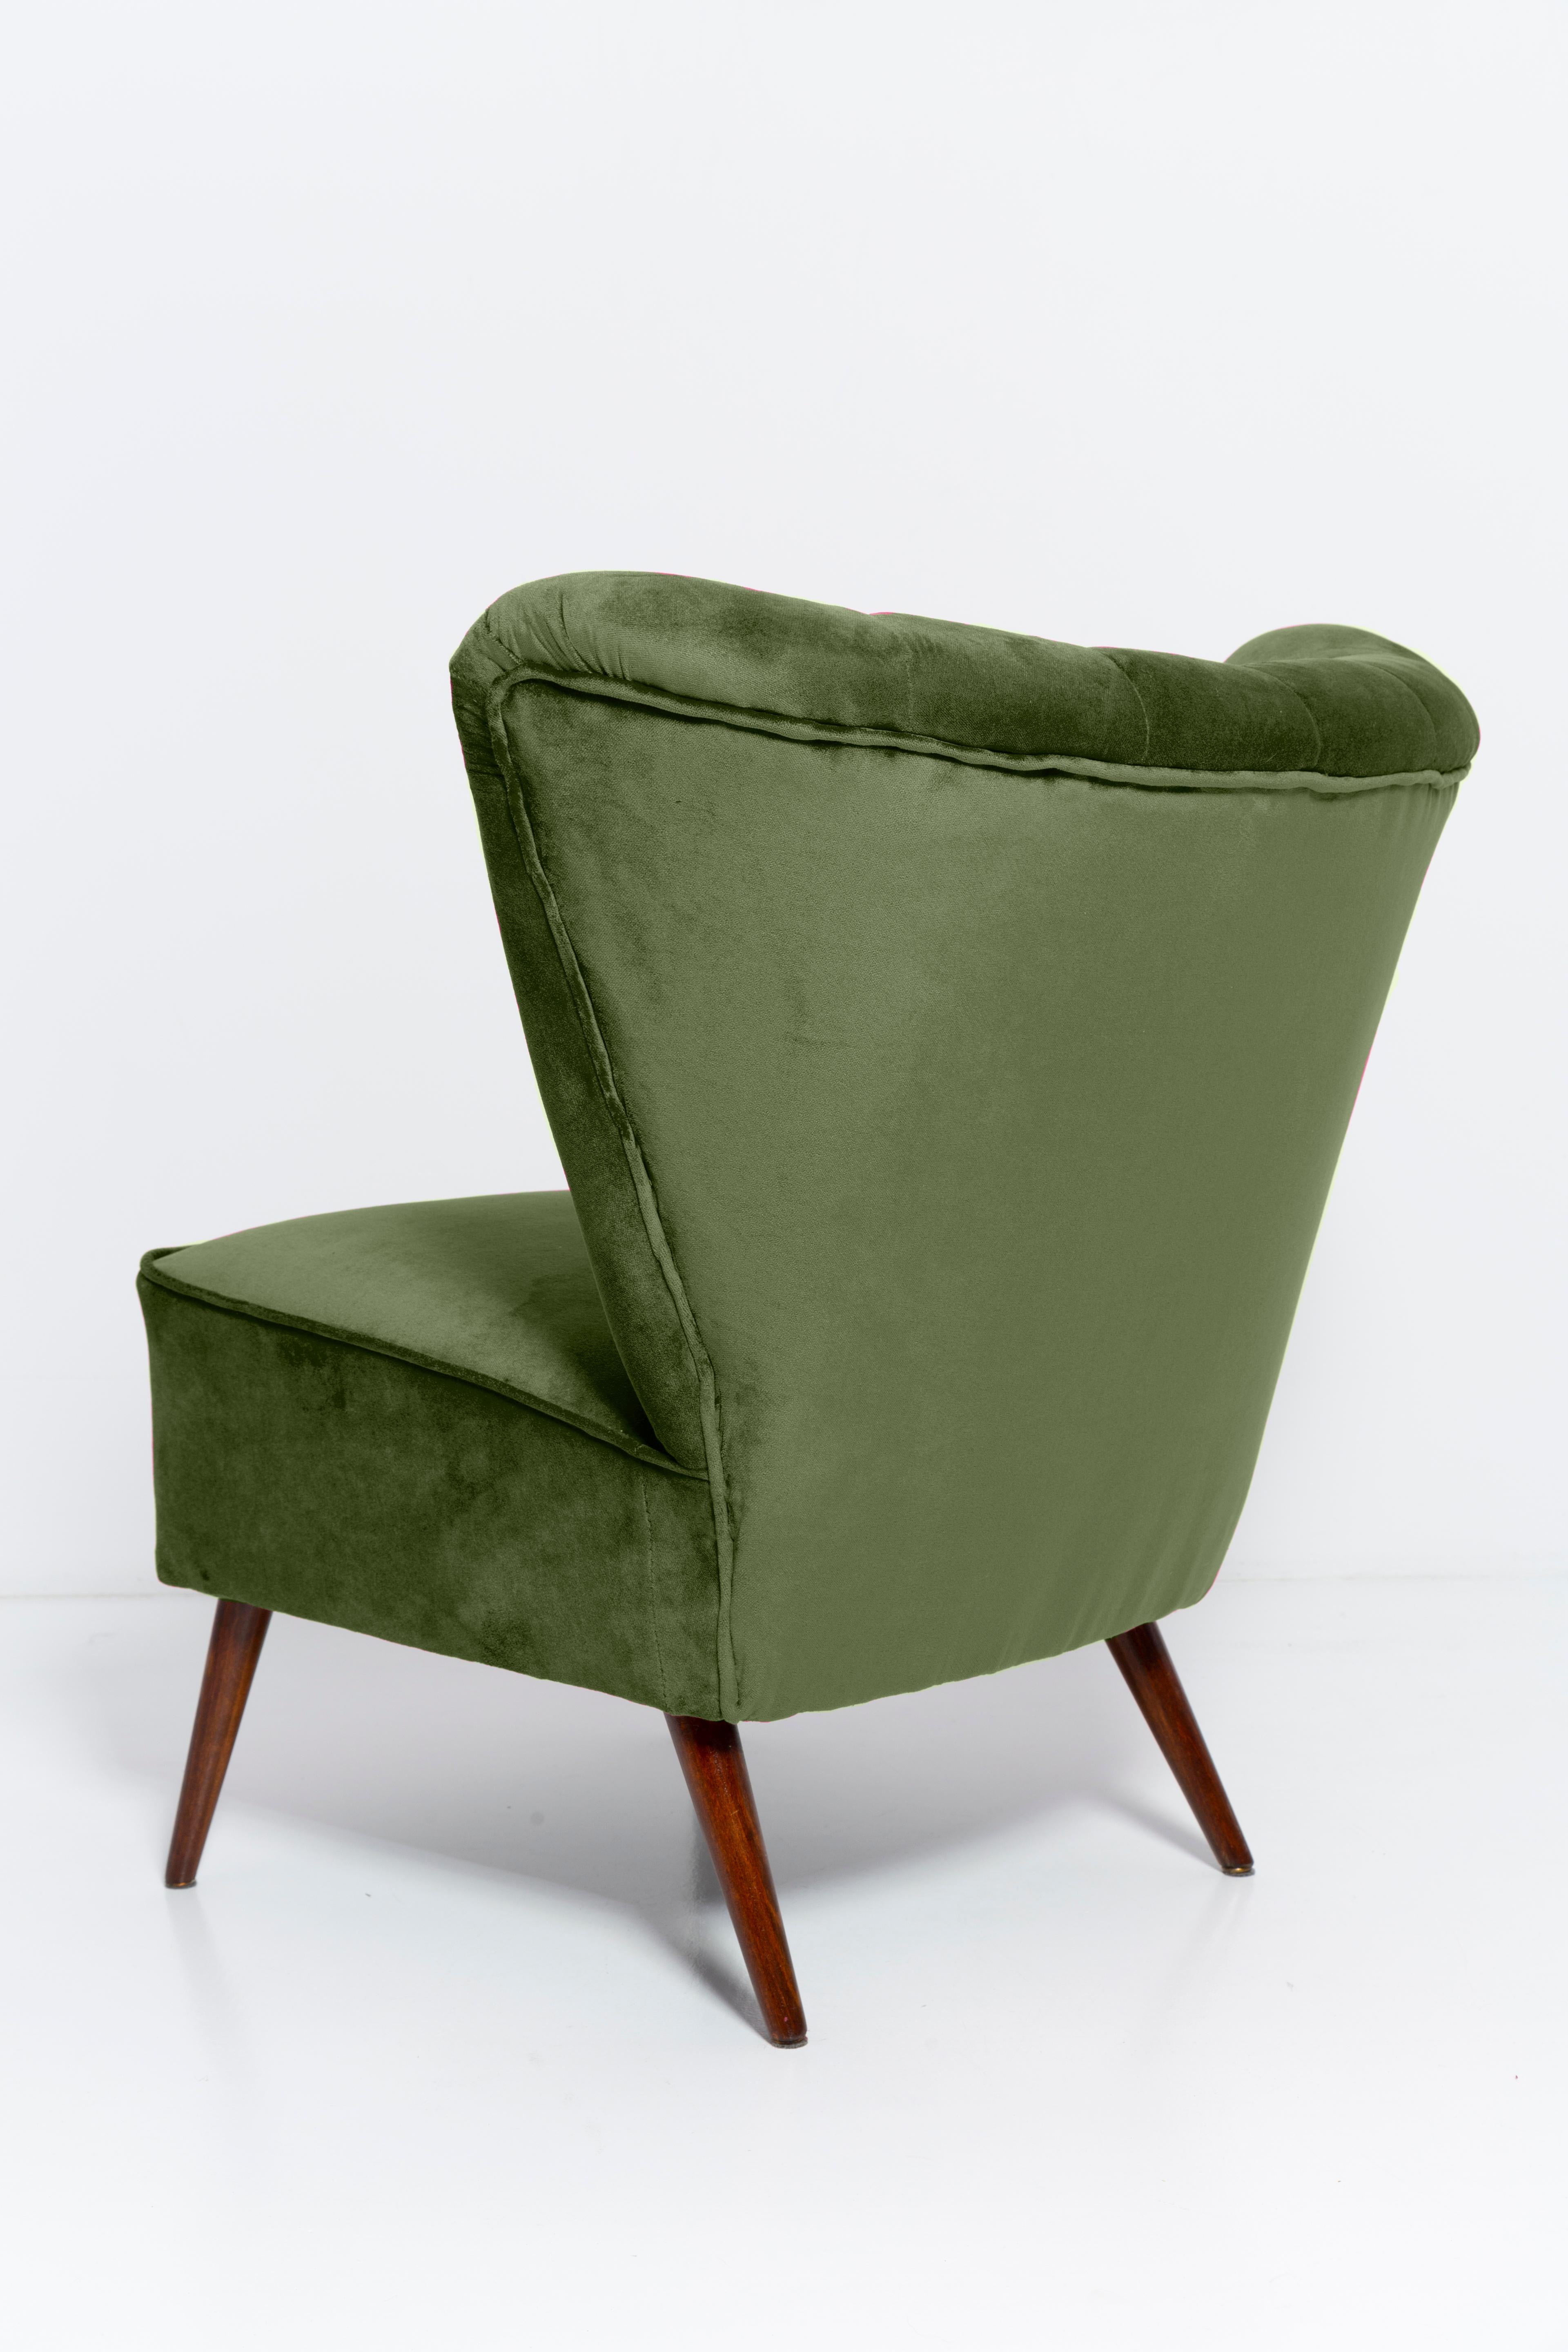 Set of Two Mid-Century Green Velvet Club Armchairs, Europe, 1960s For Sale 6